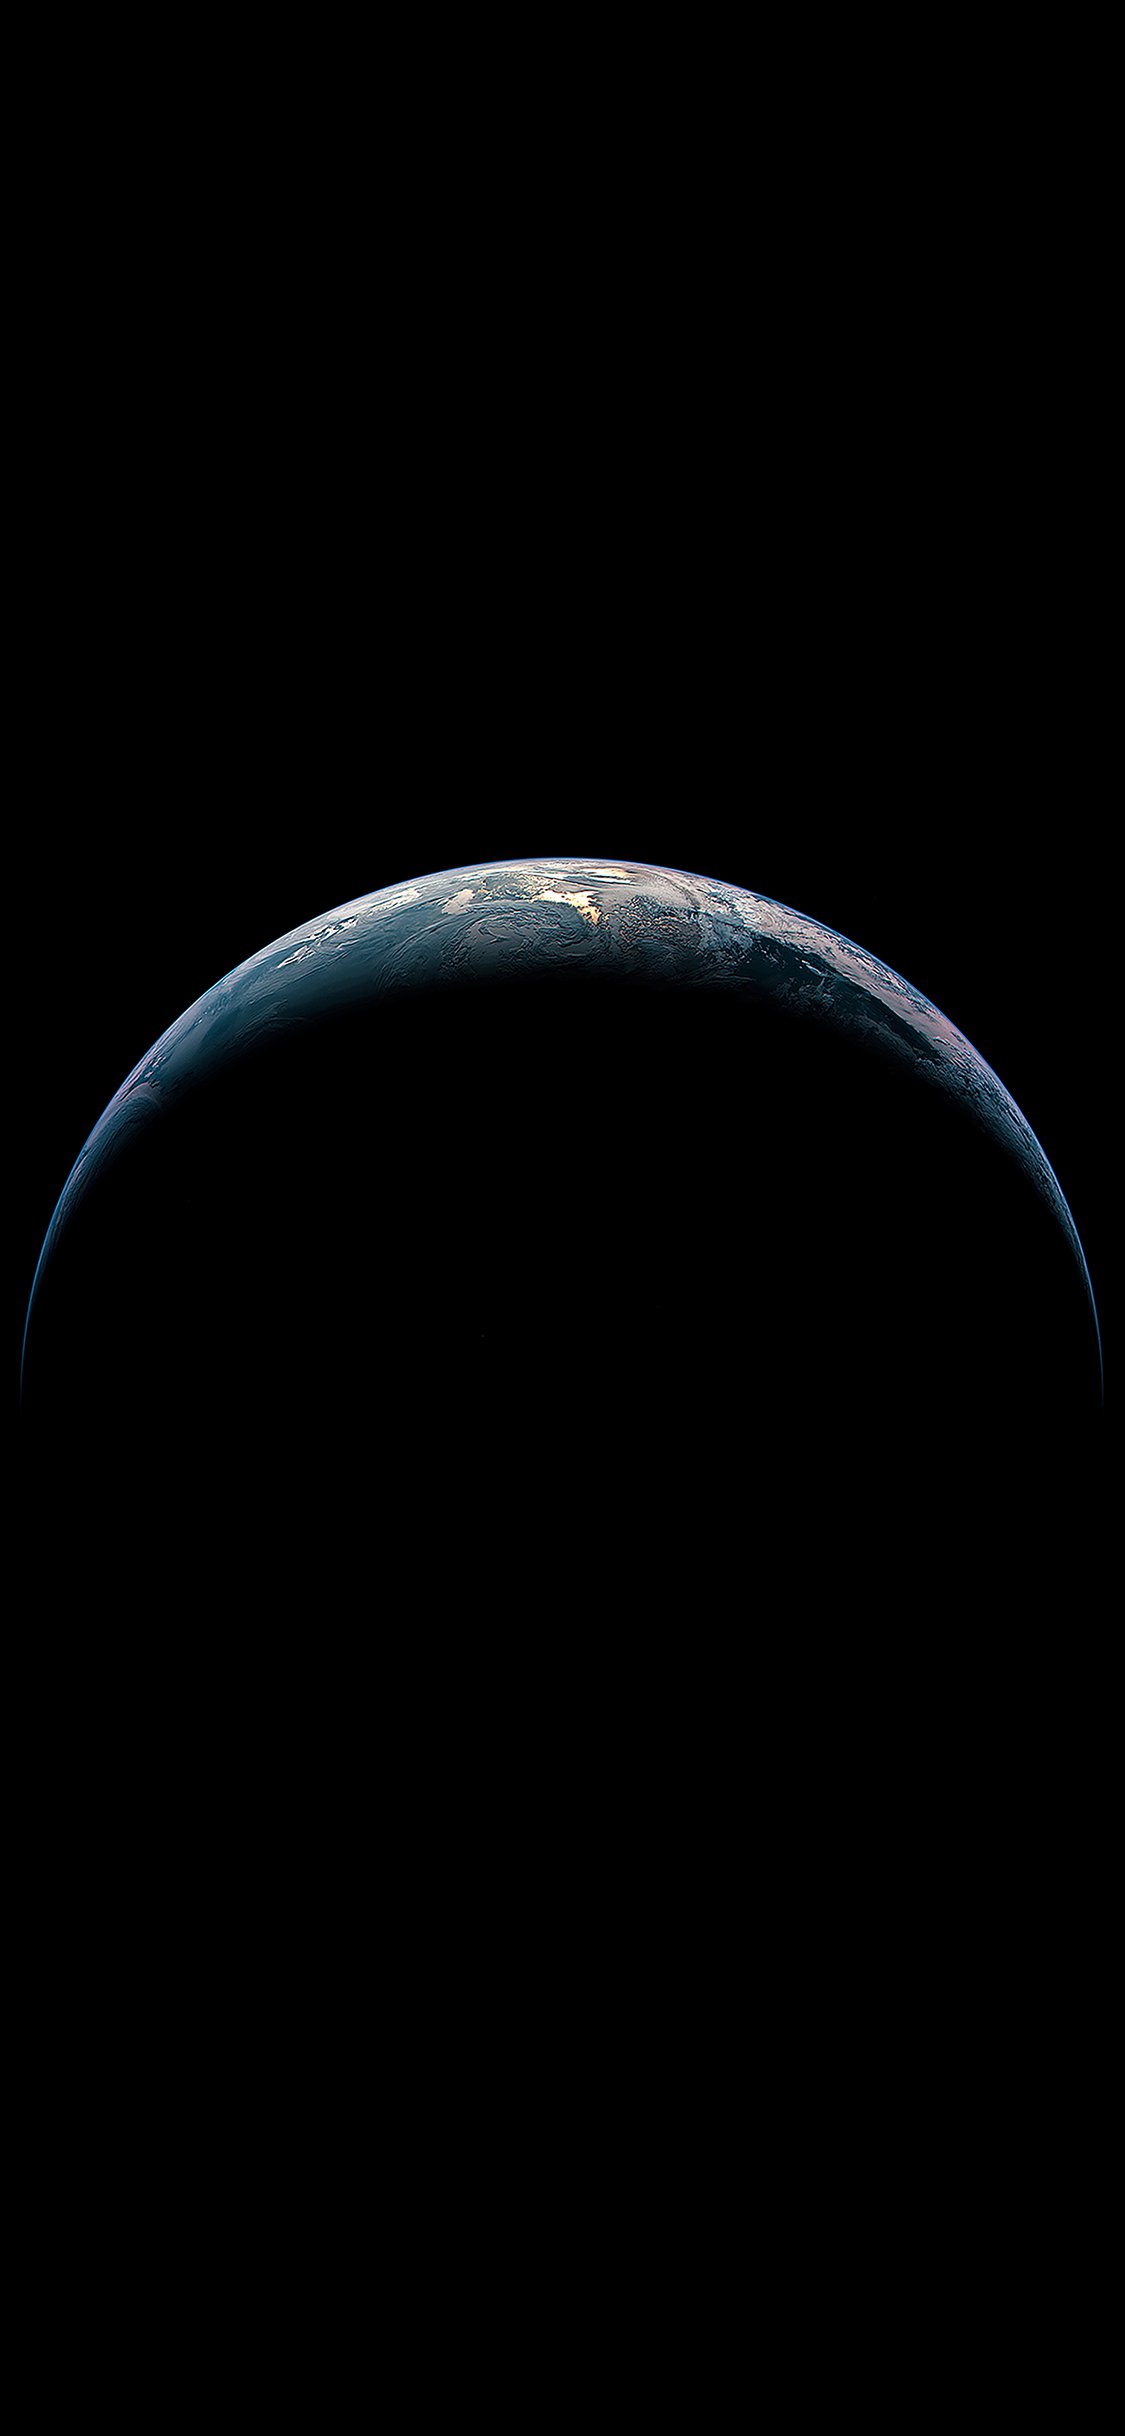 Earth from sky iPhone X Wallpaper Free Download